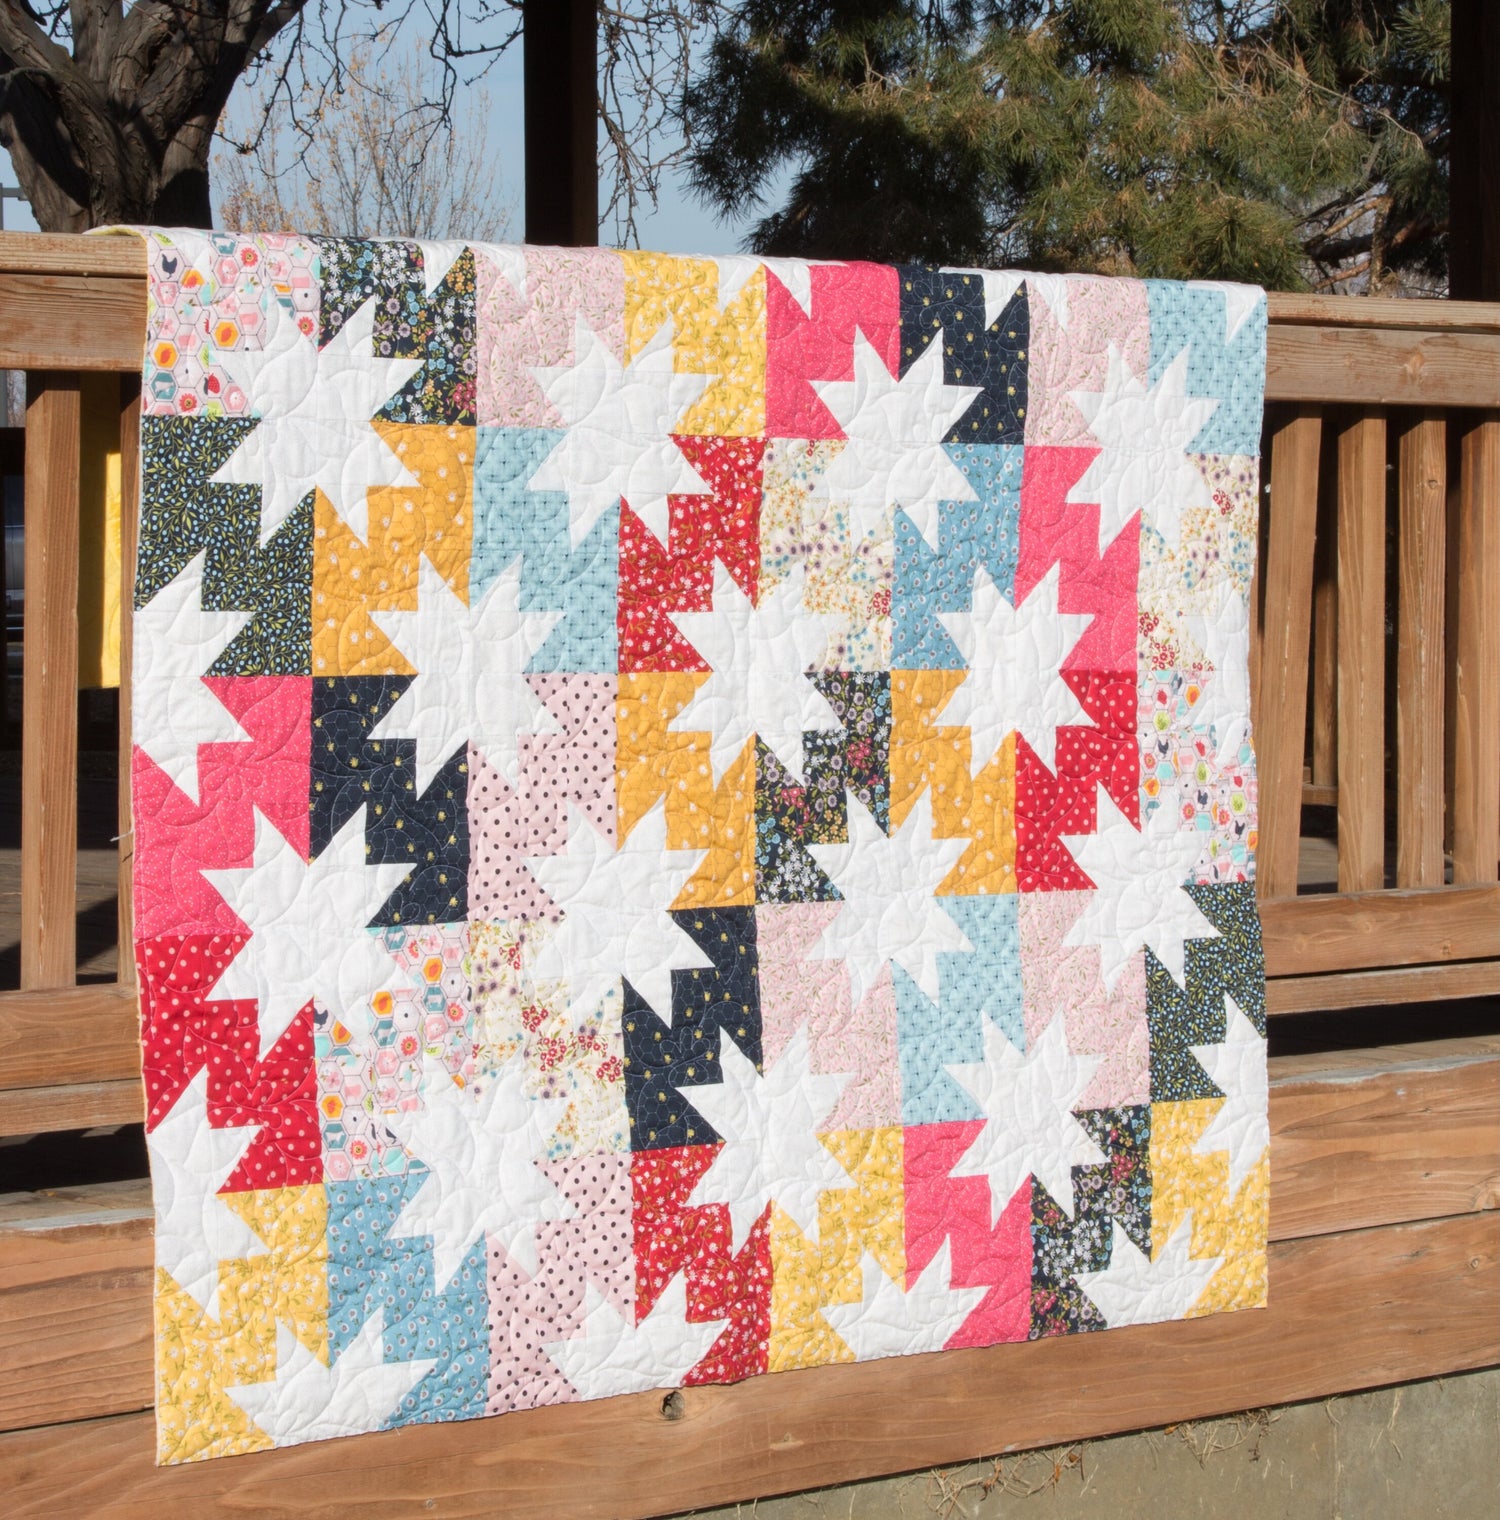 Star Pop Quilt Kit - Pattern by Emily Dennis of Quilty Love - fabric kit and quilt pattern